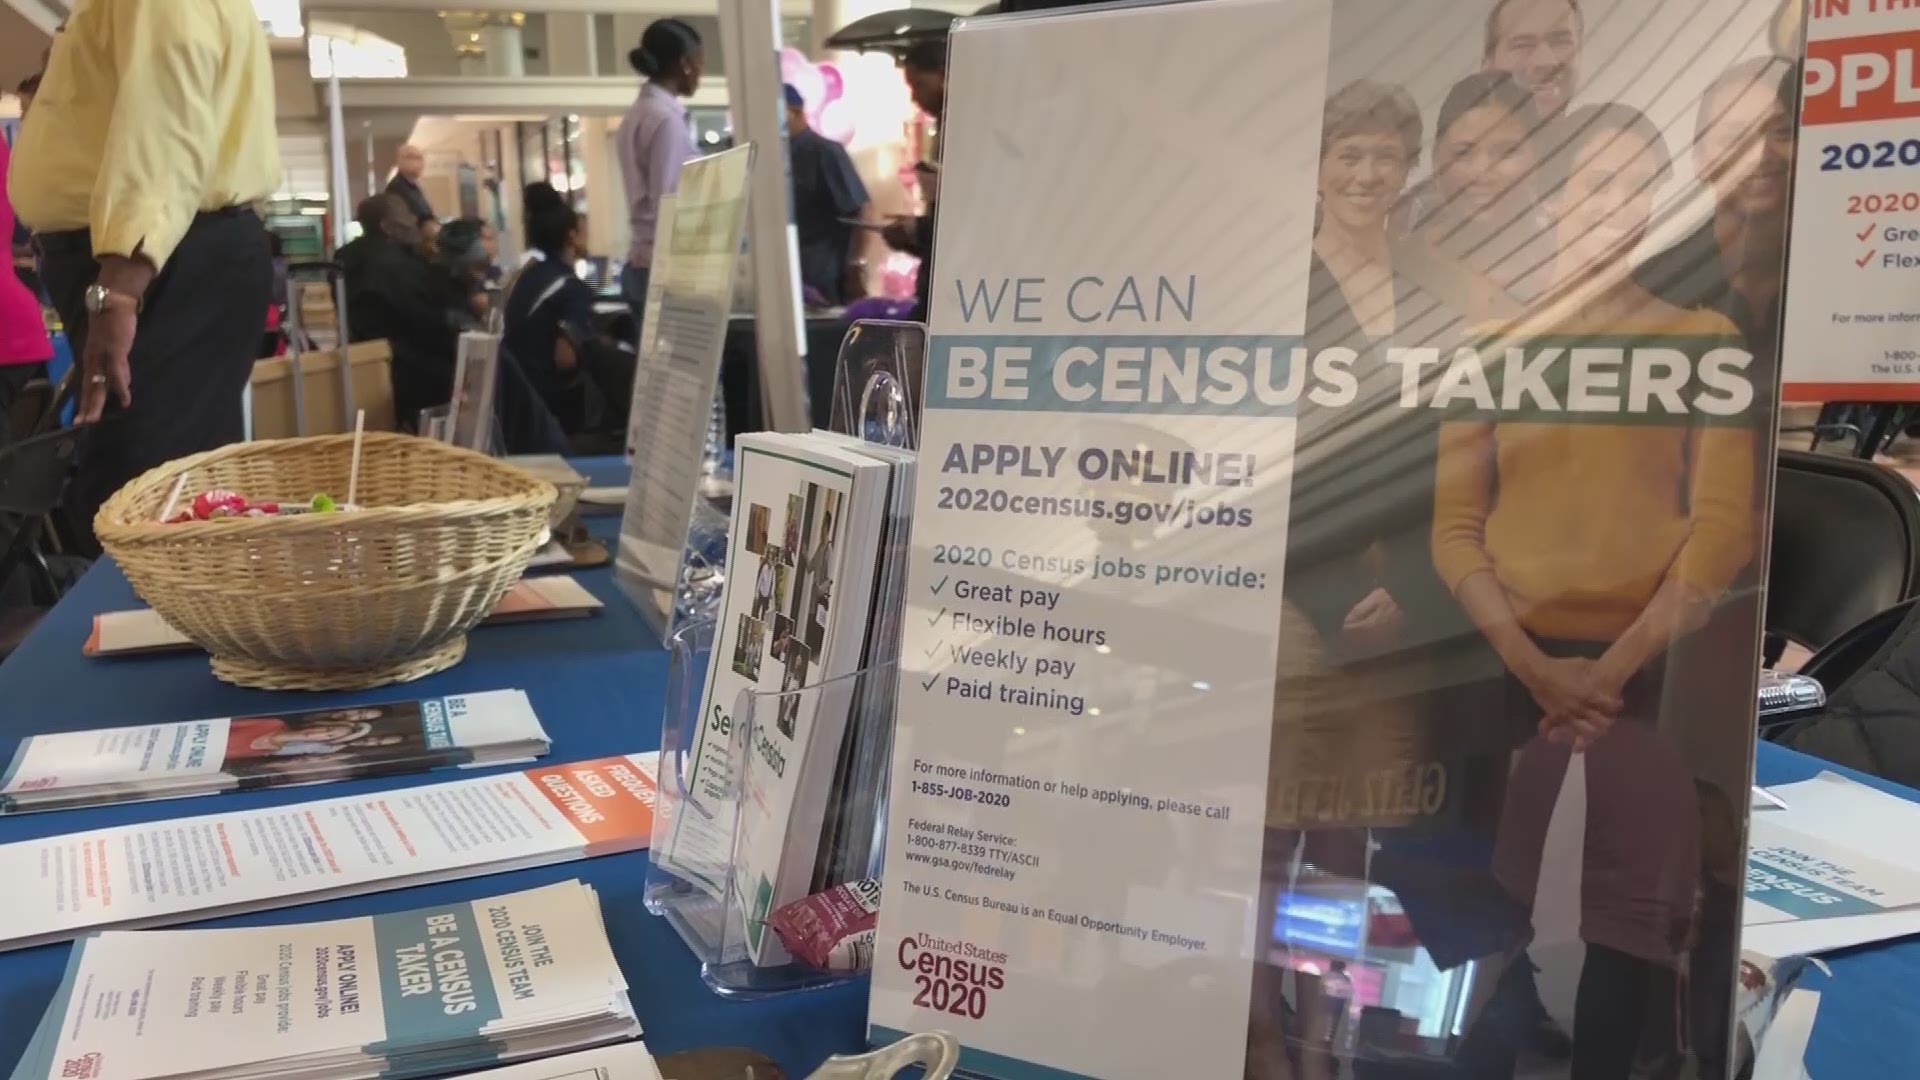 With the 2020 Census right around the corner, the U.S. Census Bureau is looking for employees